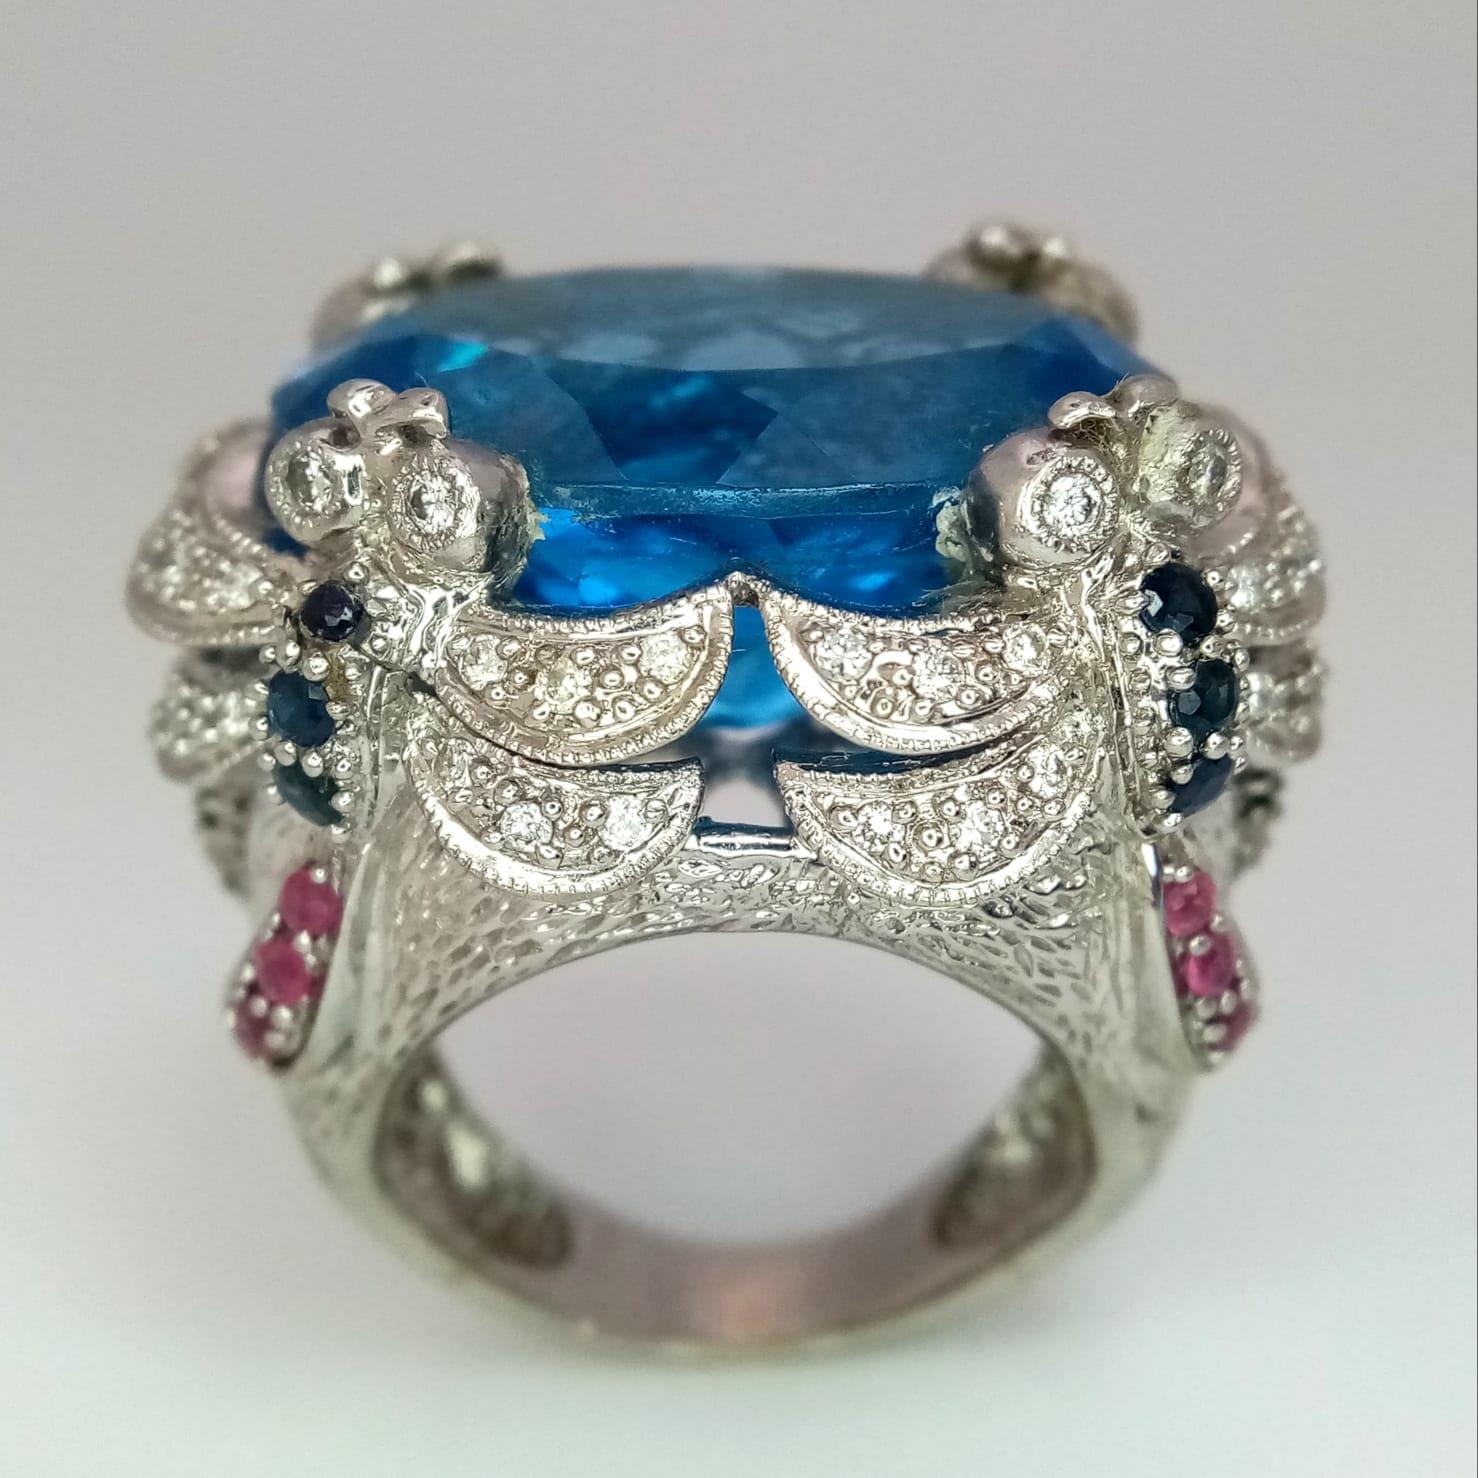 An 18kt White Gold Exquisite Fancy Cocktail Ring Set with Diamonds, Rubies, Sapphires & Emeralds - Image 2 of 10